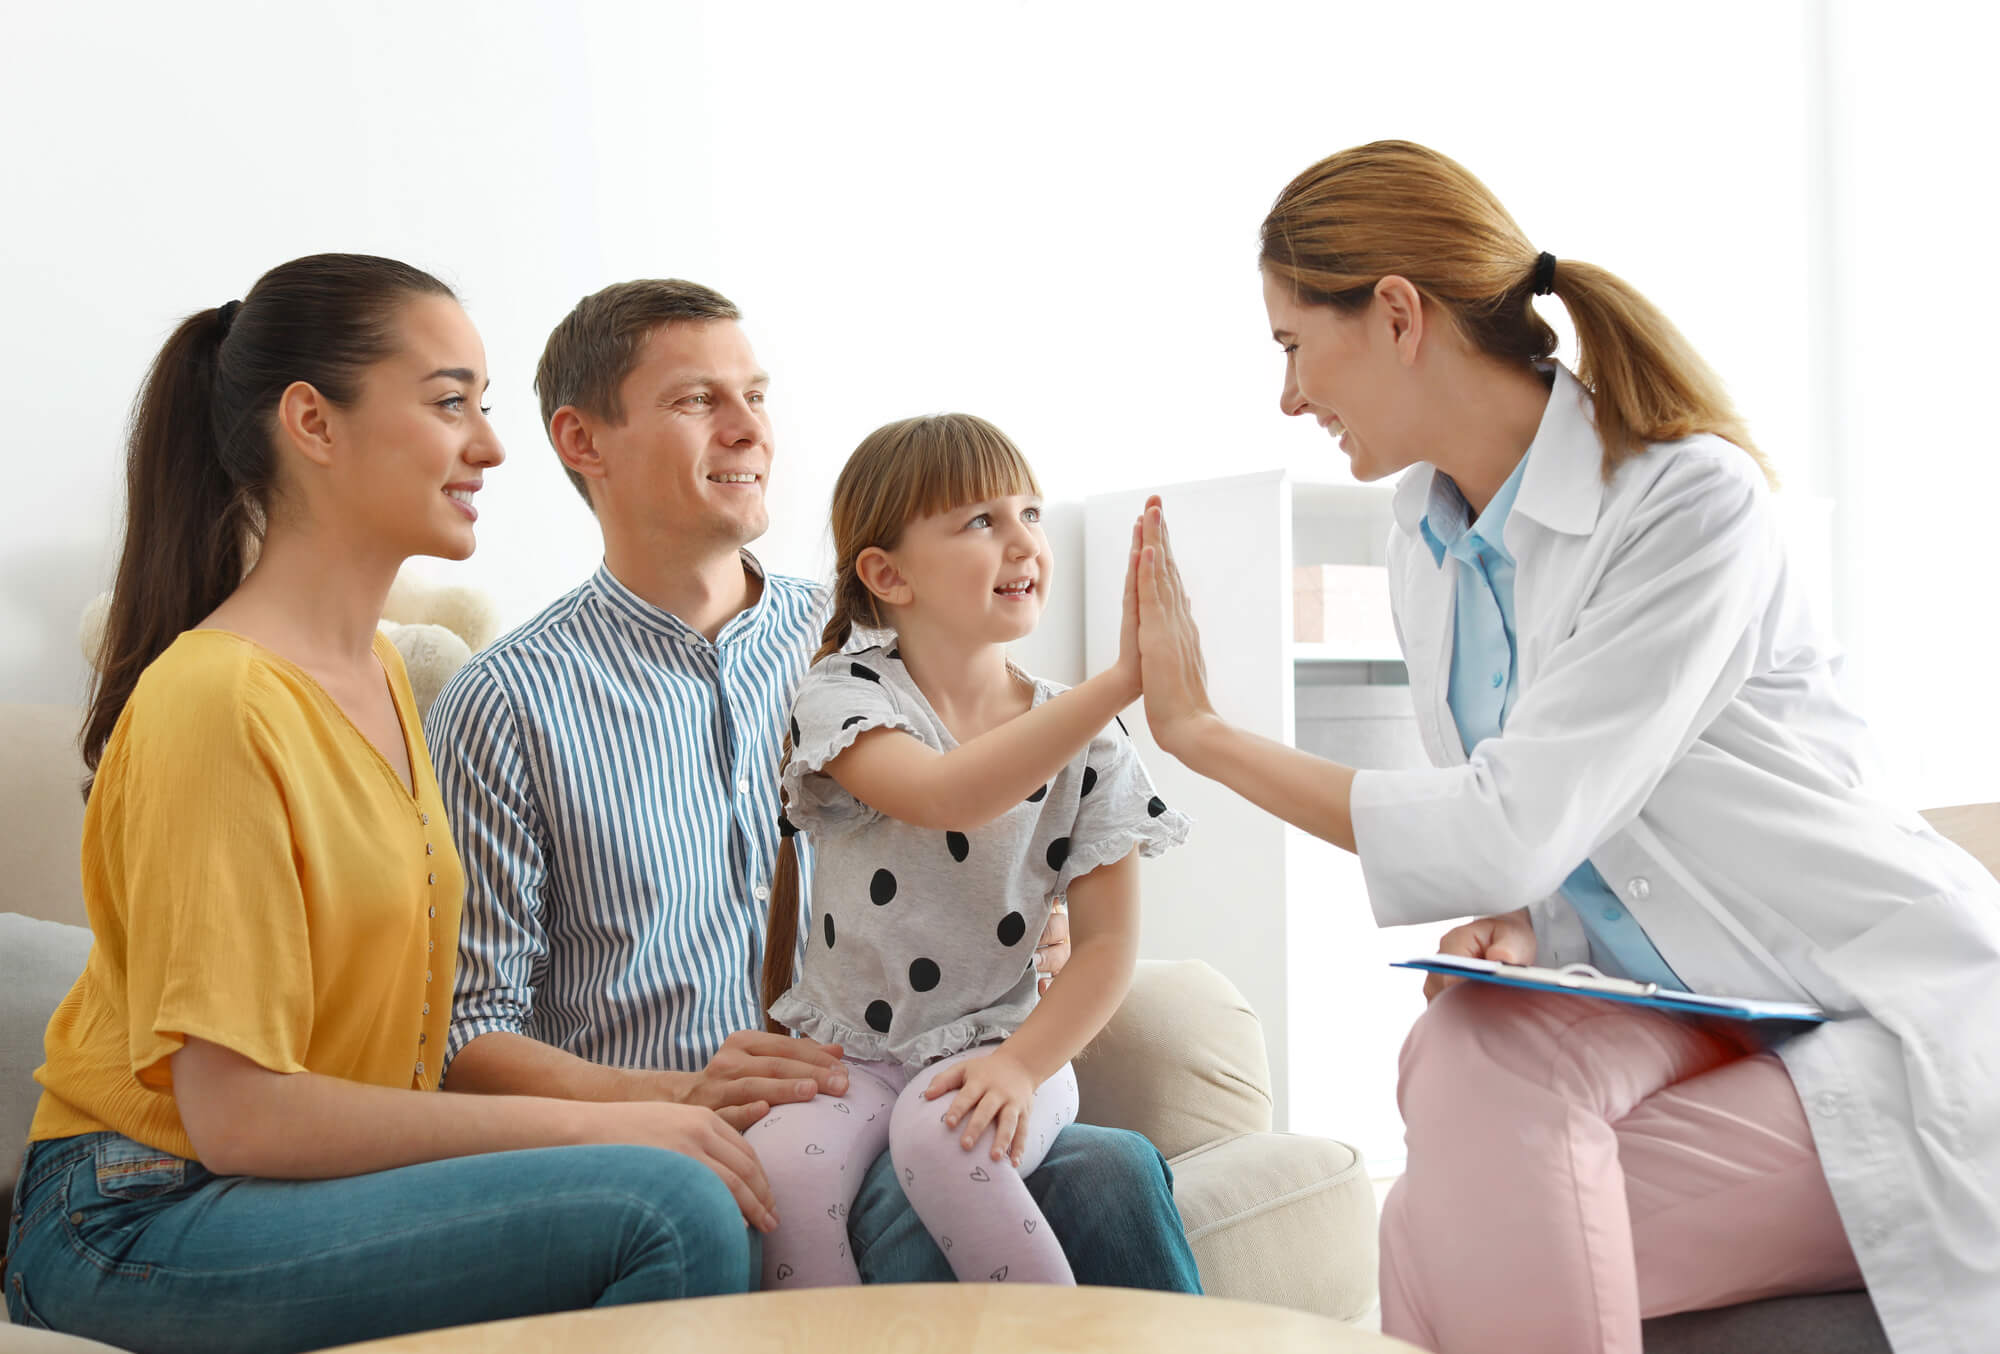 doctor home visits (wadms)